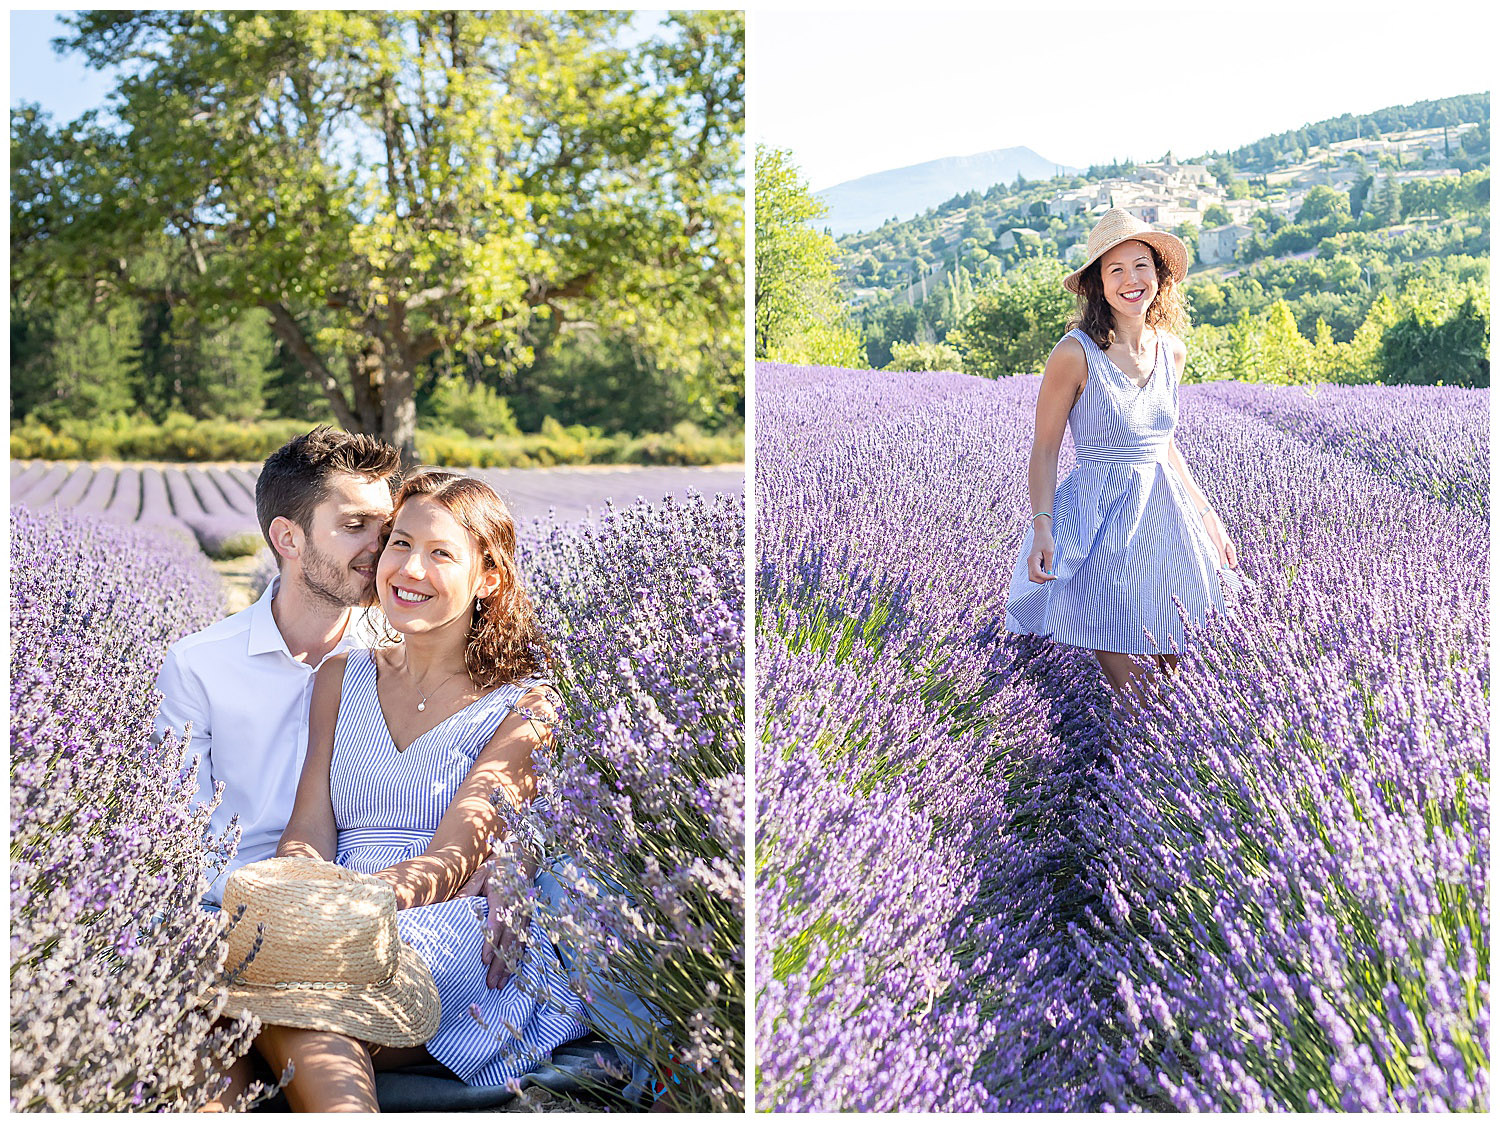 Marie-Calfopoulos-photographer-Provence-Luberon-Sault-Valensole-lavender-fields-photo-session_0017